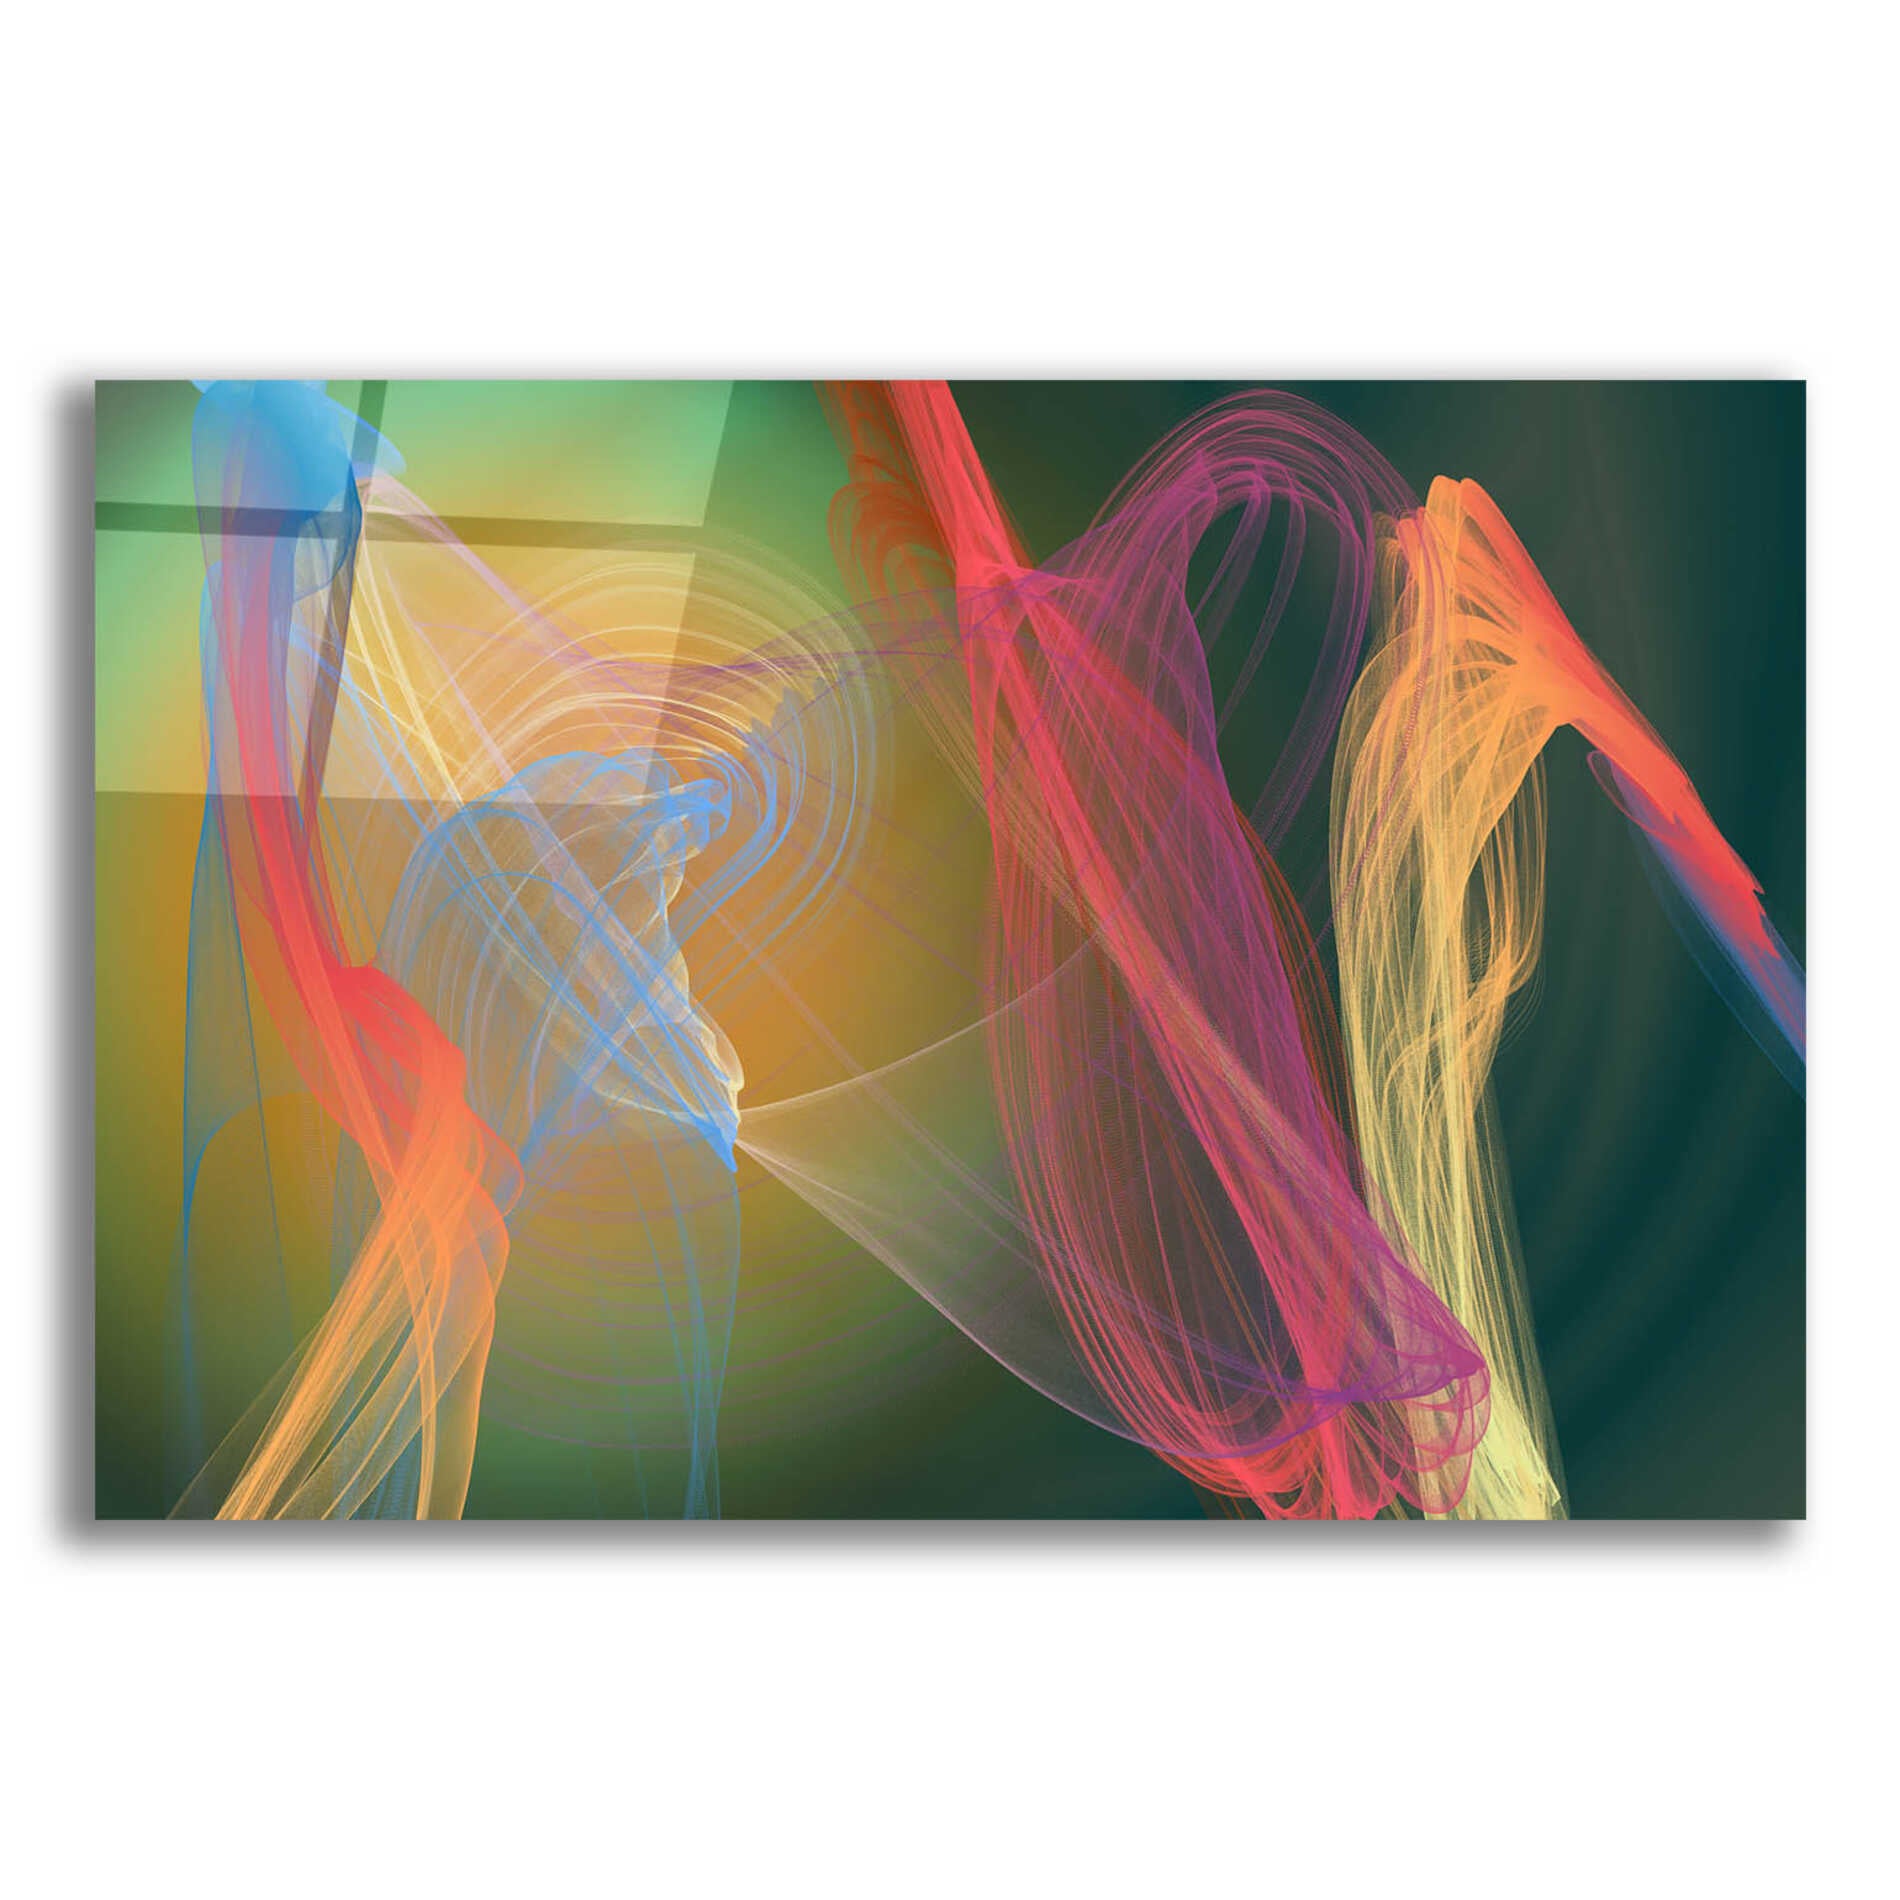 Epic Art 'Inverted Color In The Lines 9' by Irena Orlov Acrylic Glass Wall Art,16x12